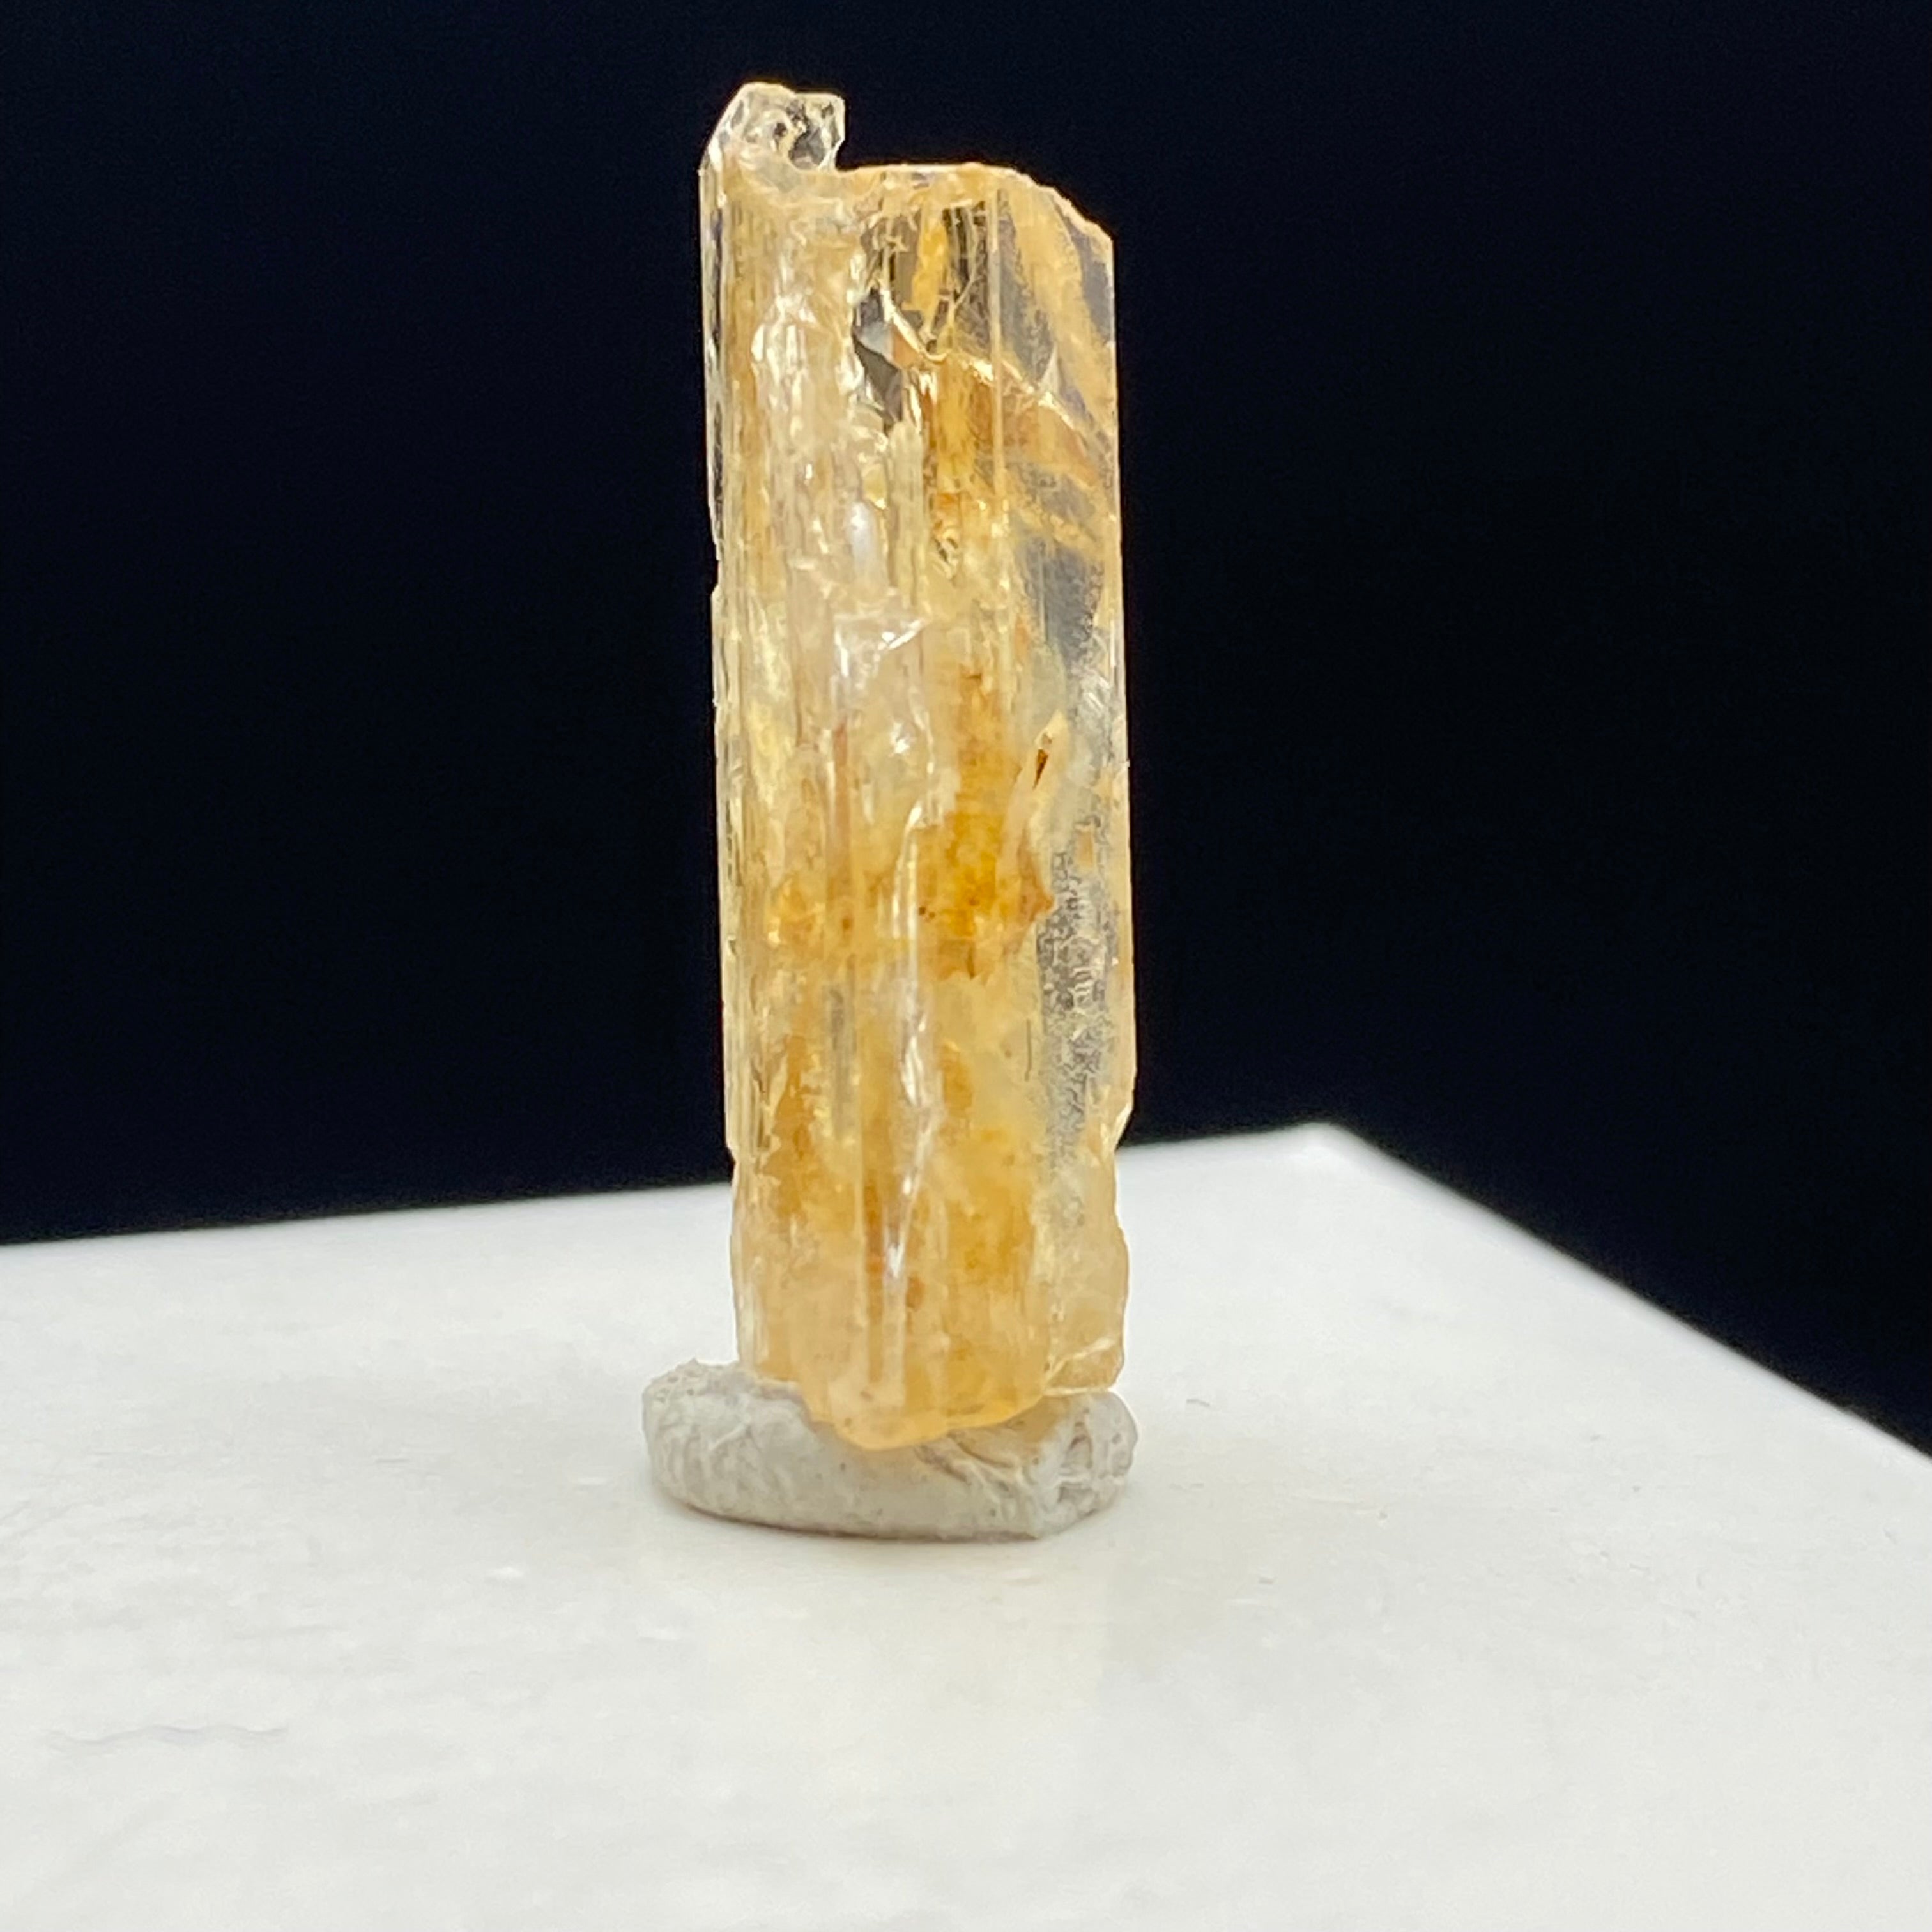 Imperial Topaz Non-Terminated Crystal - 144